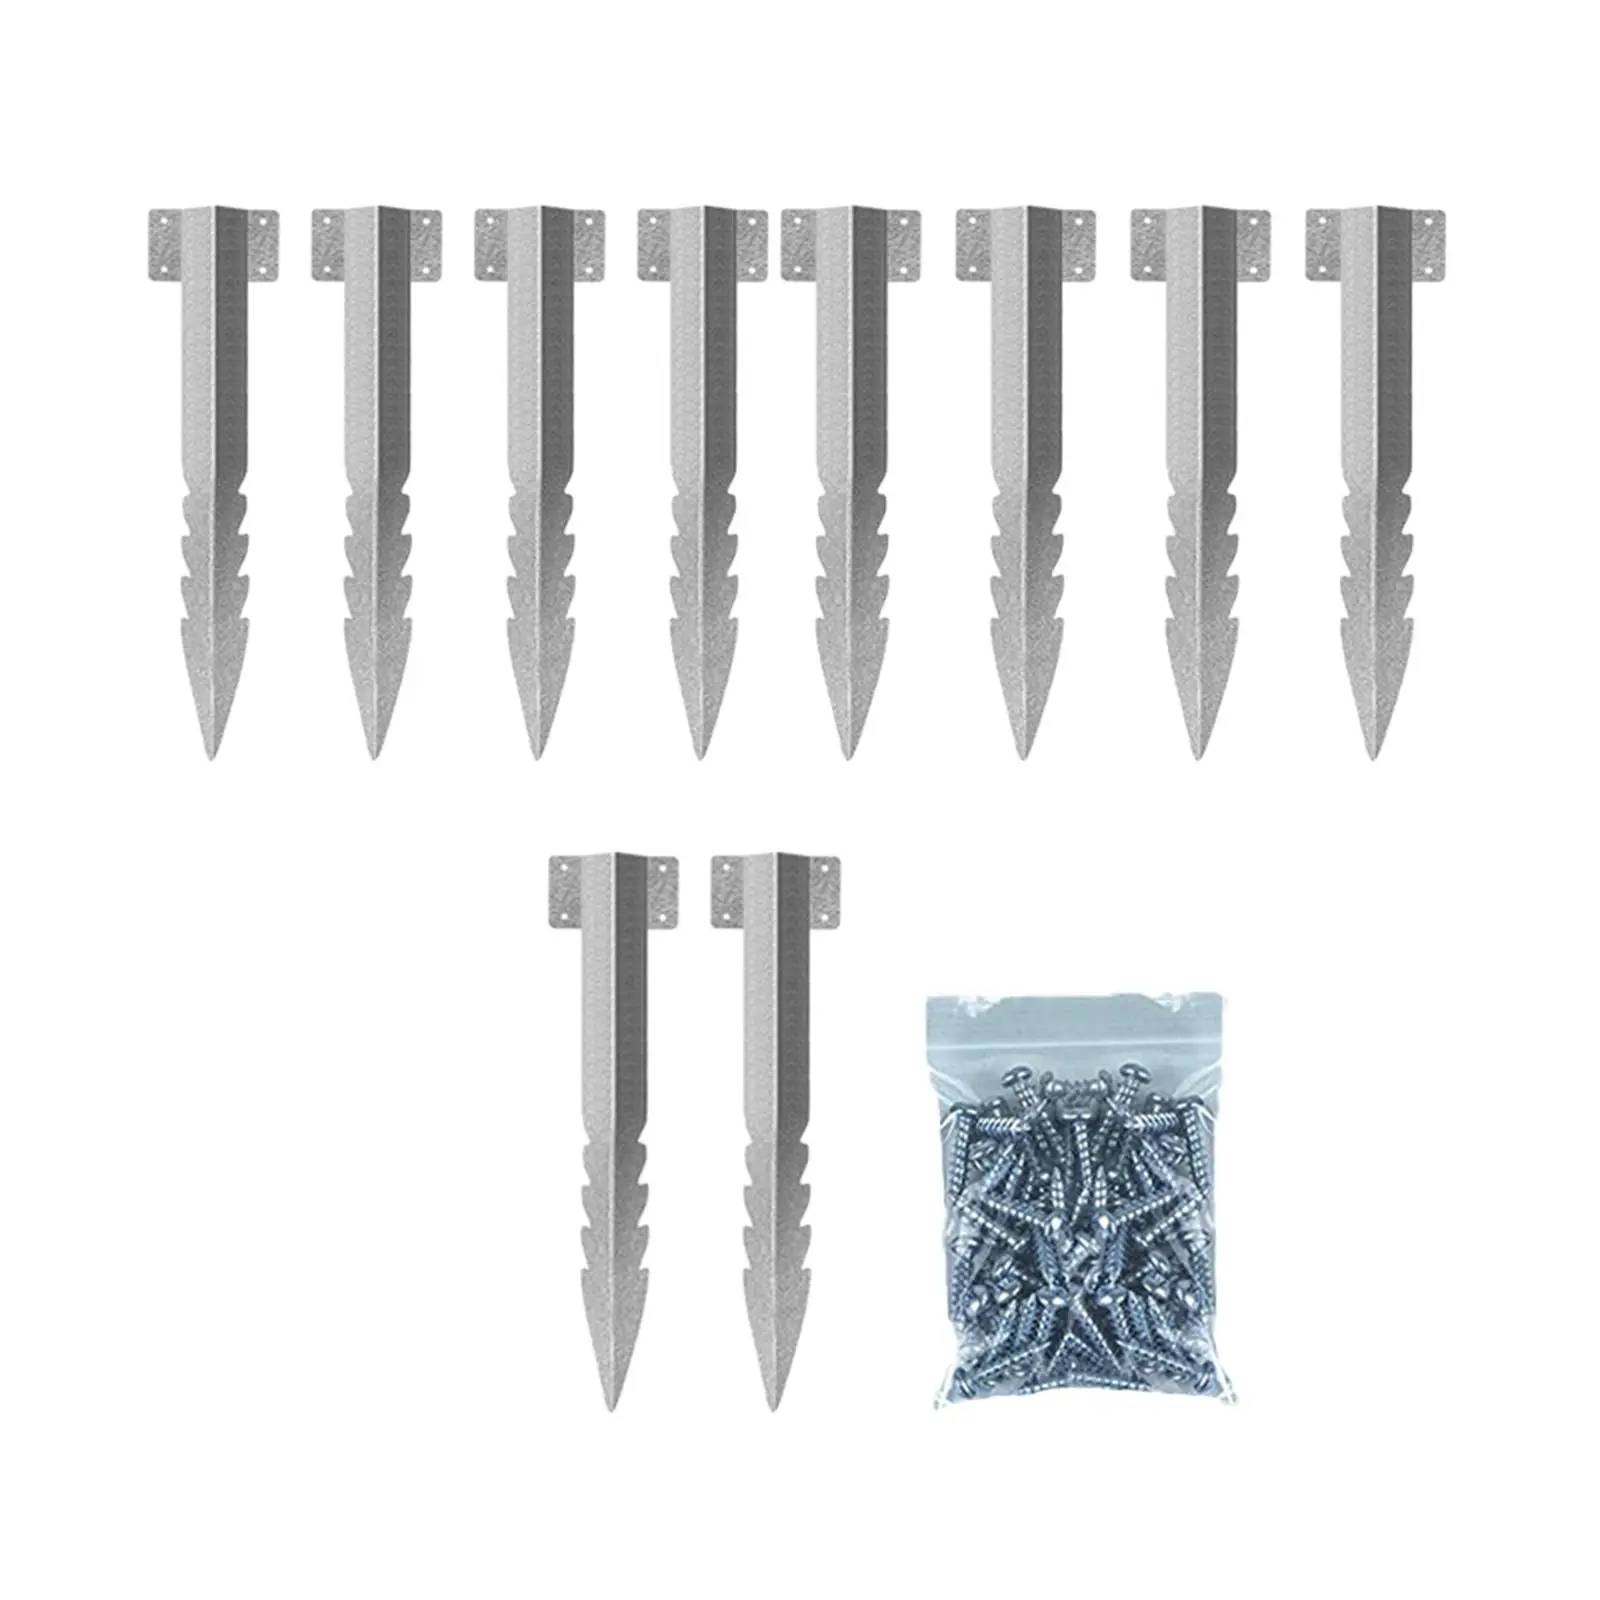 10x Fence Post Repair Kits with Screws Duable Easy to Install Railway Sleepers Brackets Rail Wooden Fence Base Construction